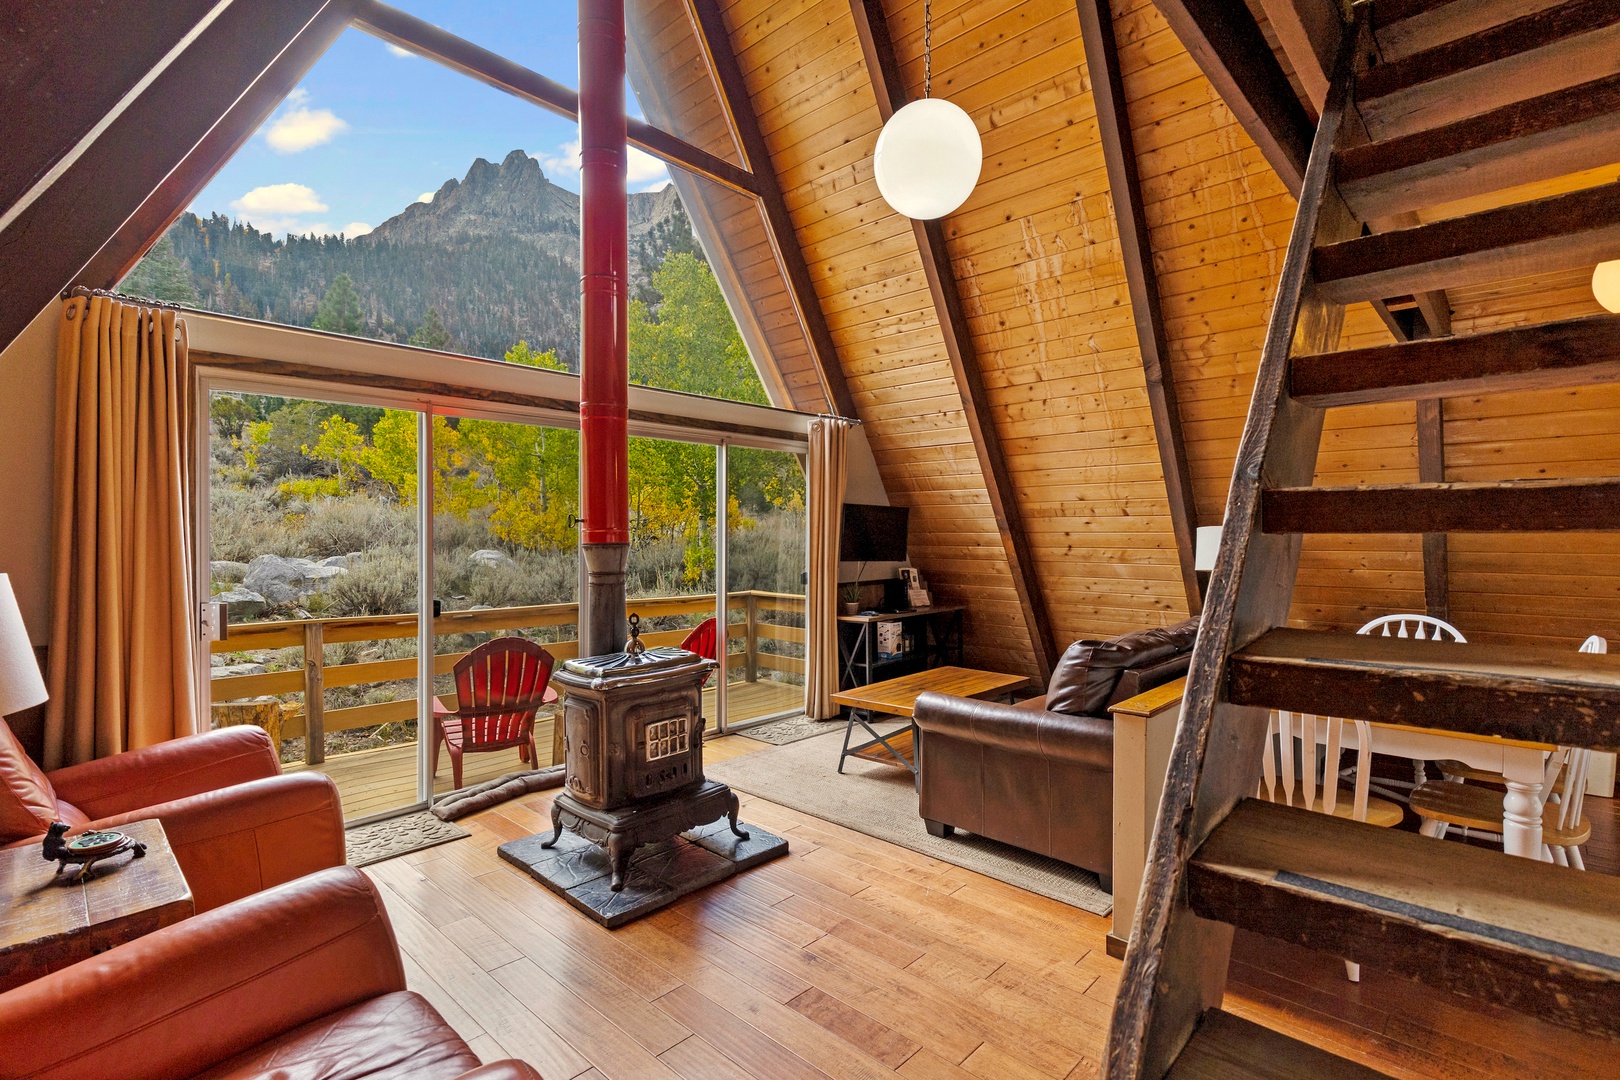 Wood burning fireplace with views for days